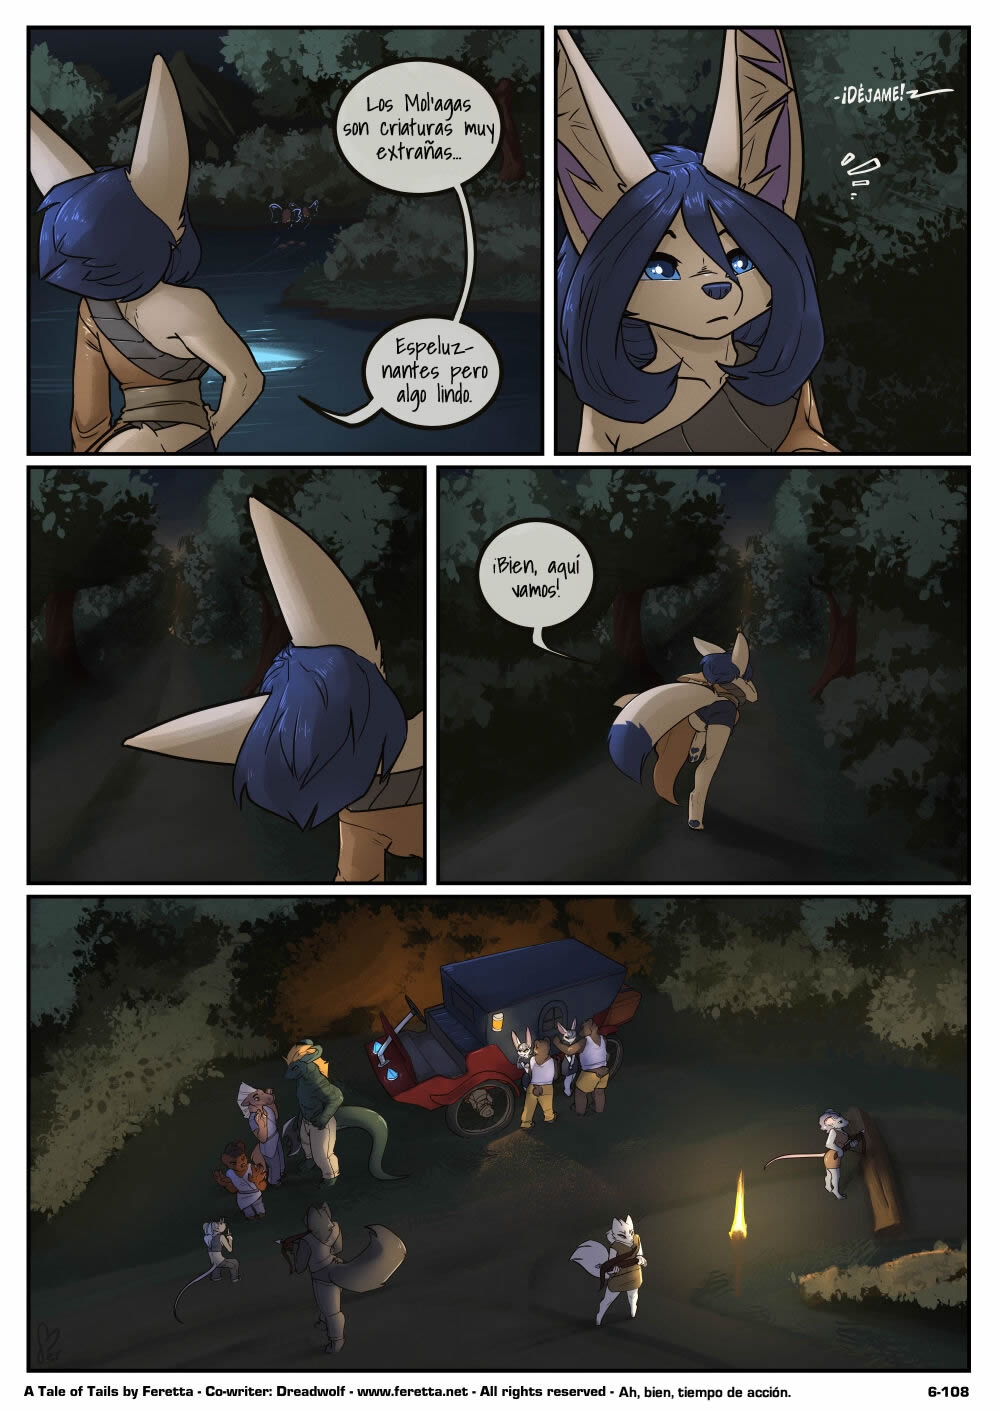 [Feretta] A Tale of Tails: Chapter 6 - Paths converge / Los caminos convergen [Spanish] [Red Fox Makkan] 108